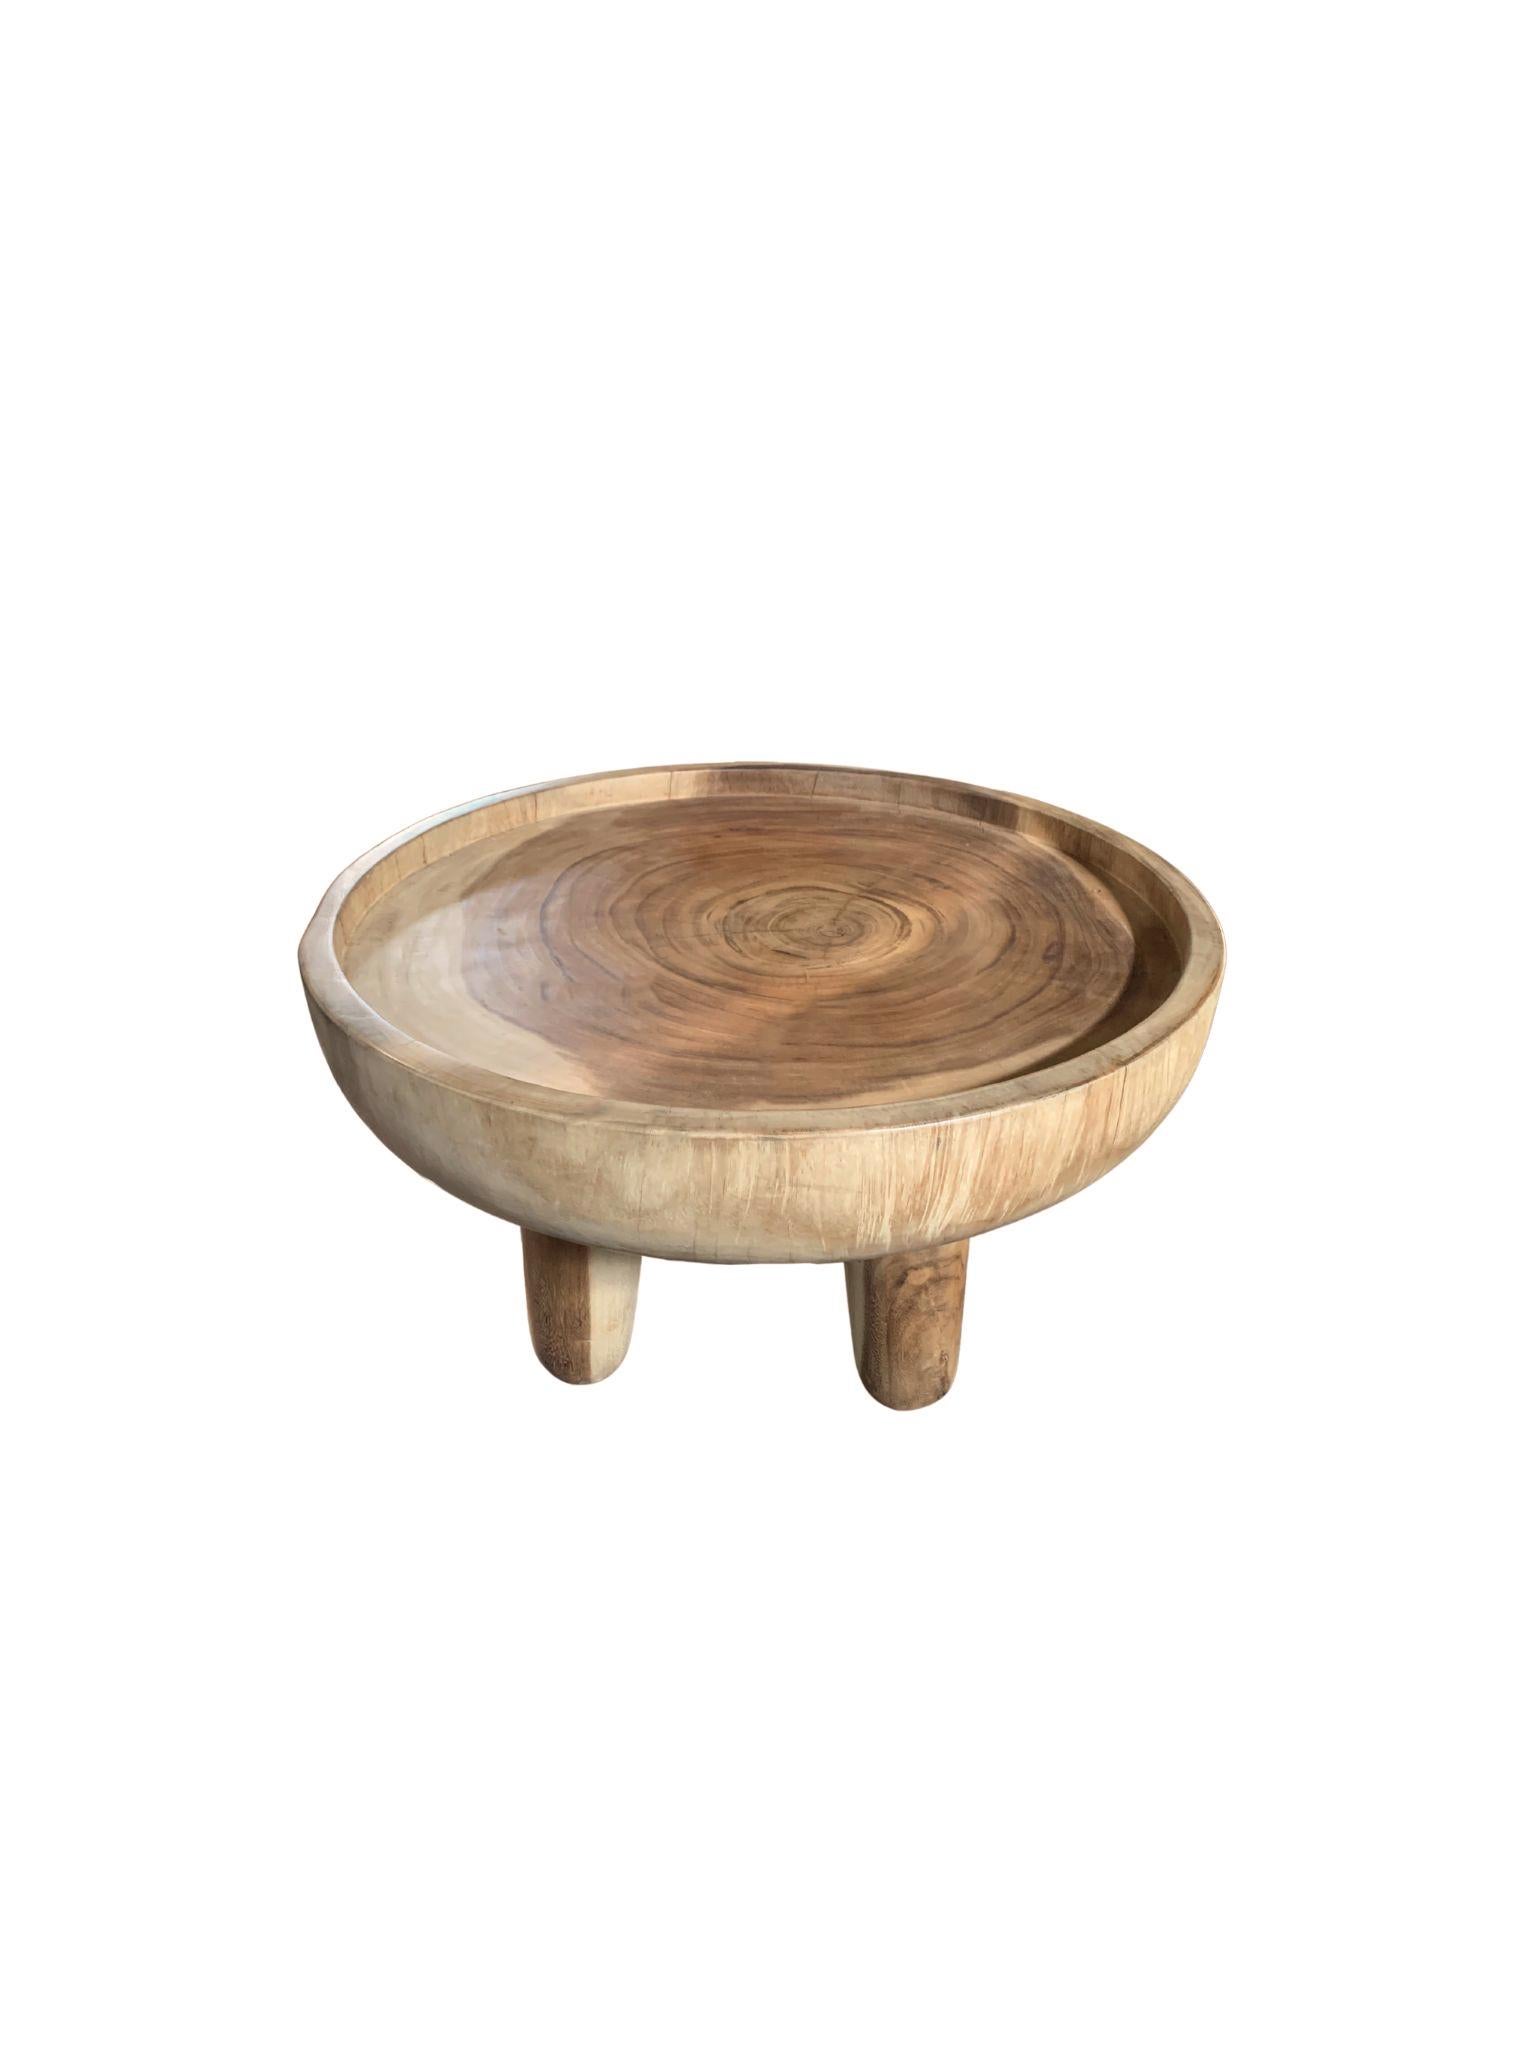 Hand-Crafted Sculptural Round Side Table Solid Mango Wood Modern Organic For Sale